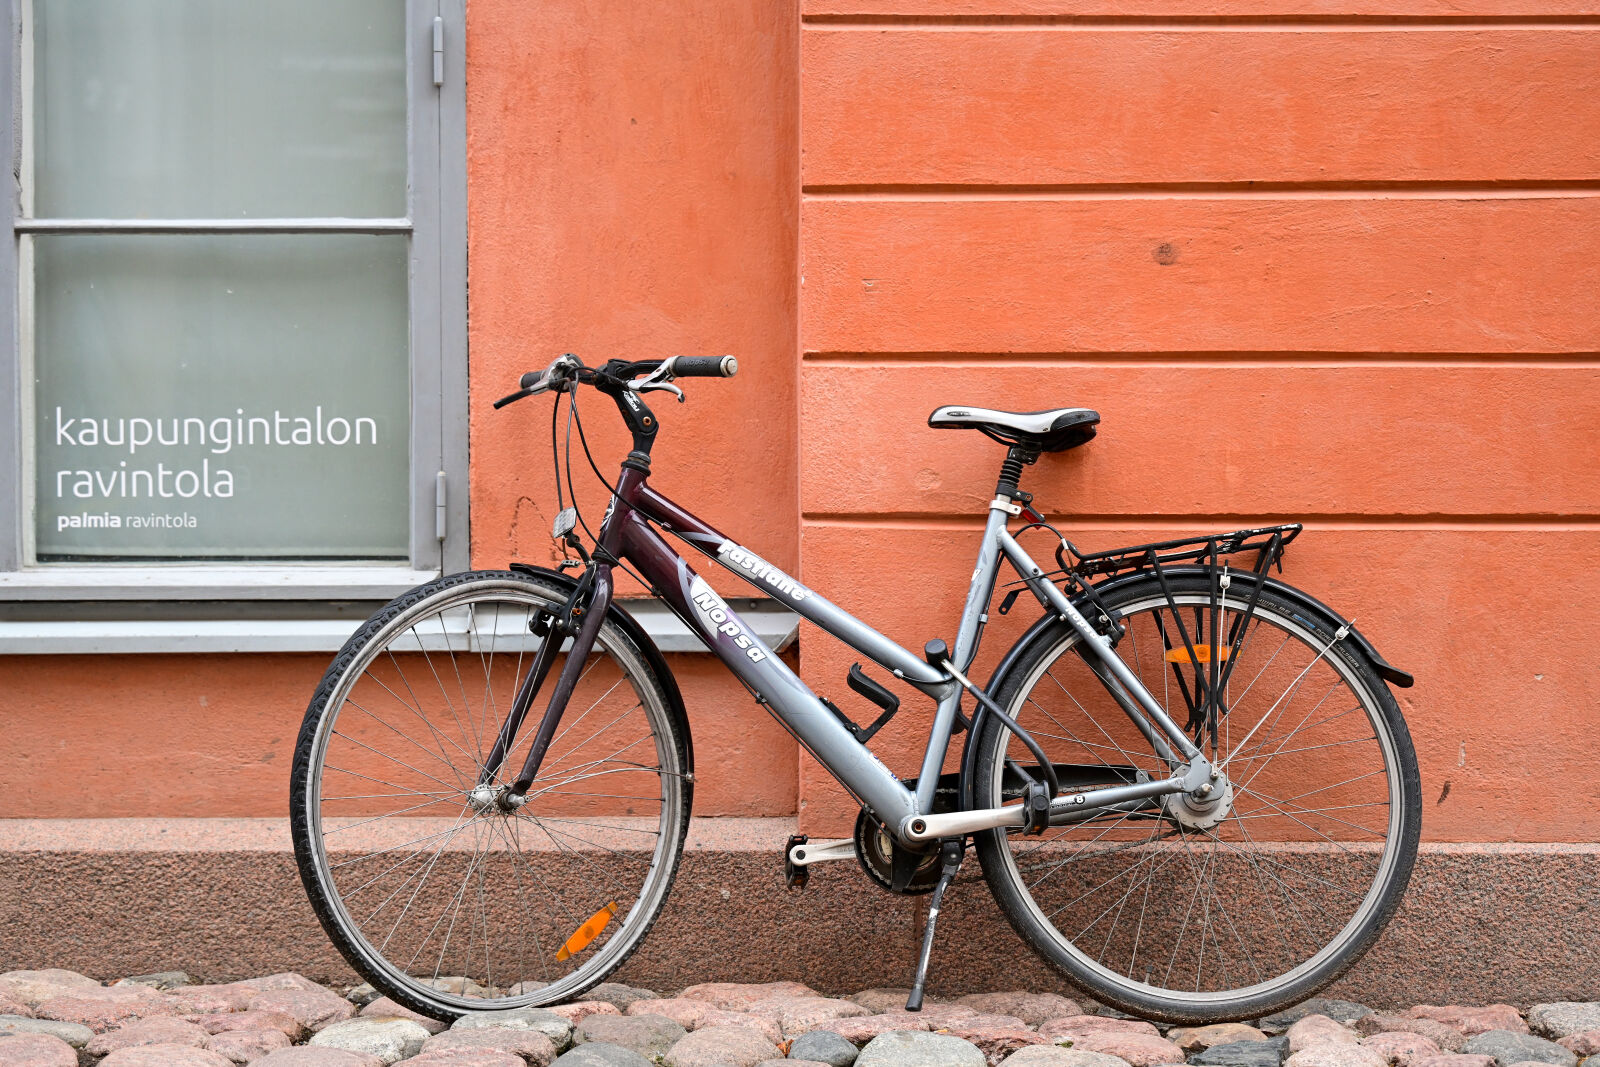 Nikon Z7 II sample photo. Bicycle at the old photography